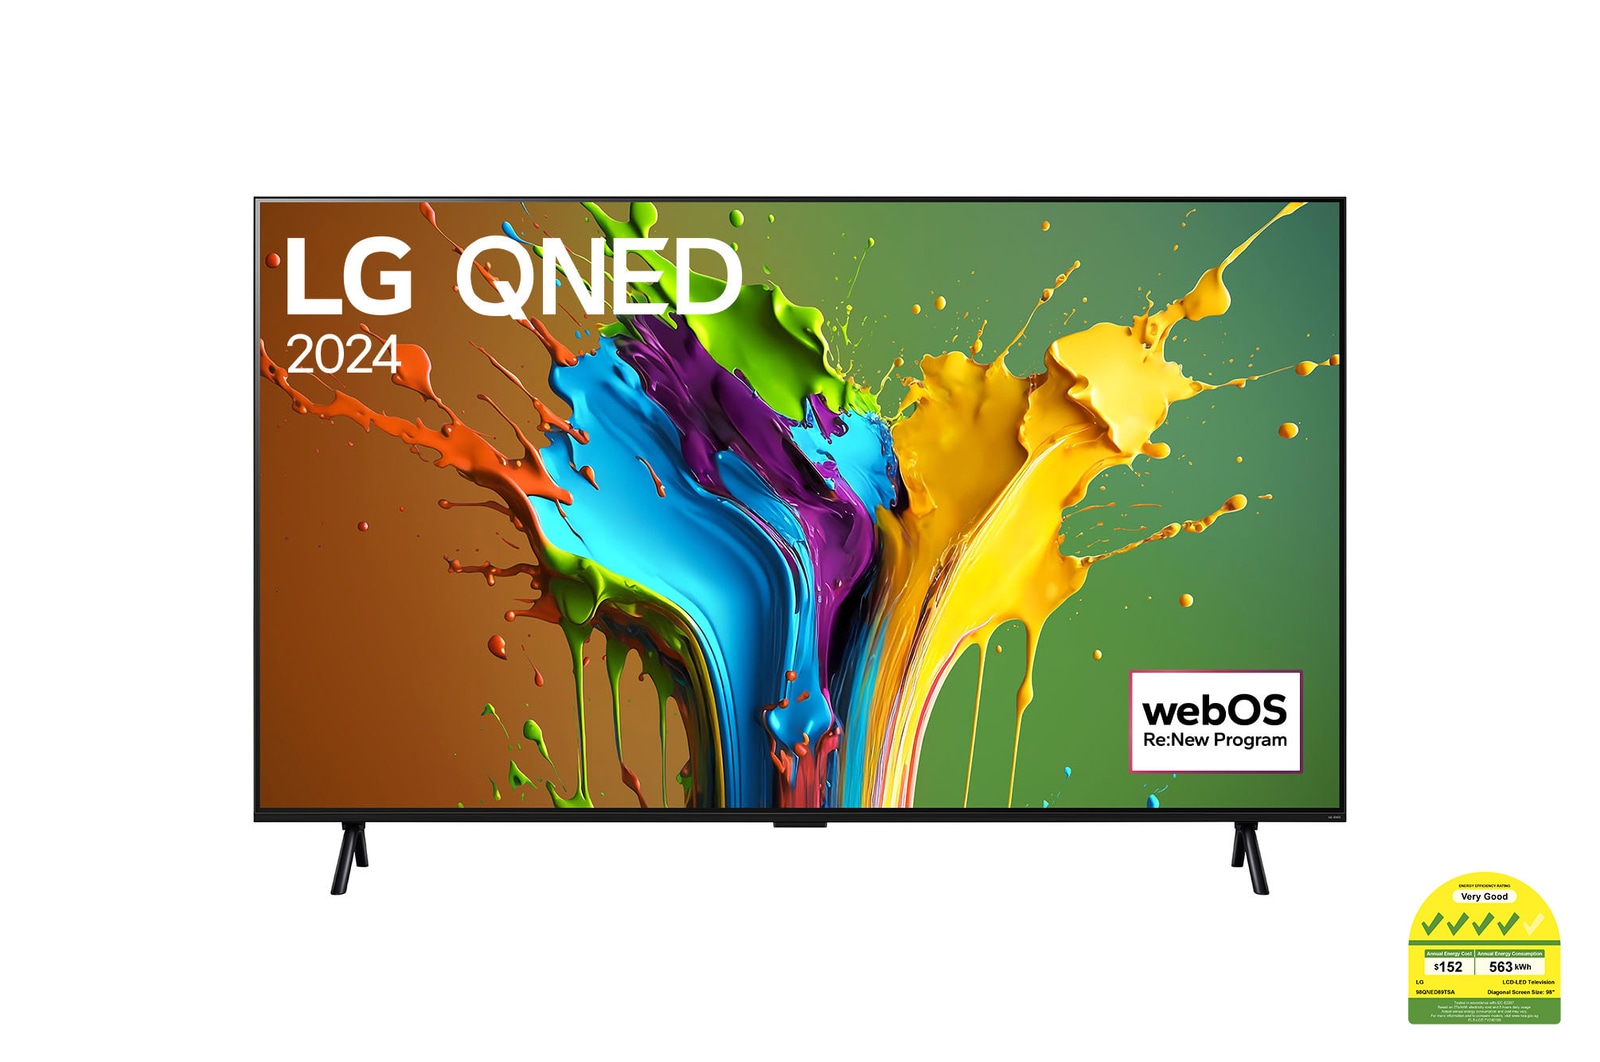 Front view of LG QNED TV, QNED89 with text of LG QNED, 2024, and webOS Re:New Program logo on screen